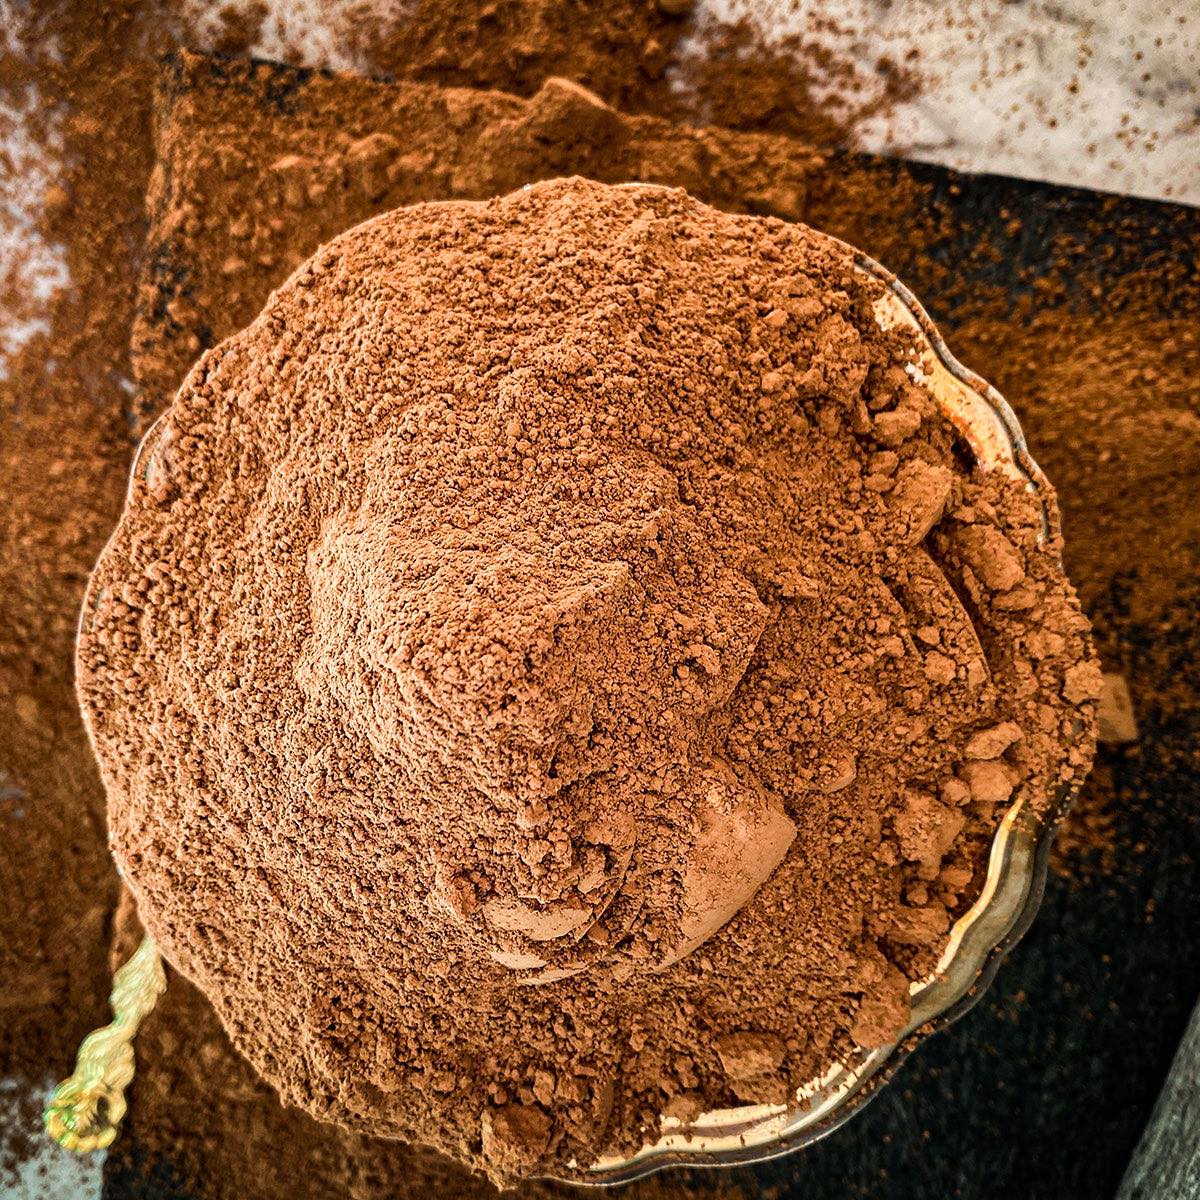 A silver dish is filled to overflowing with cacao powder.